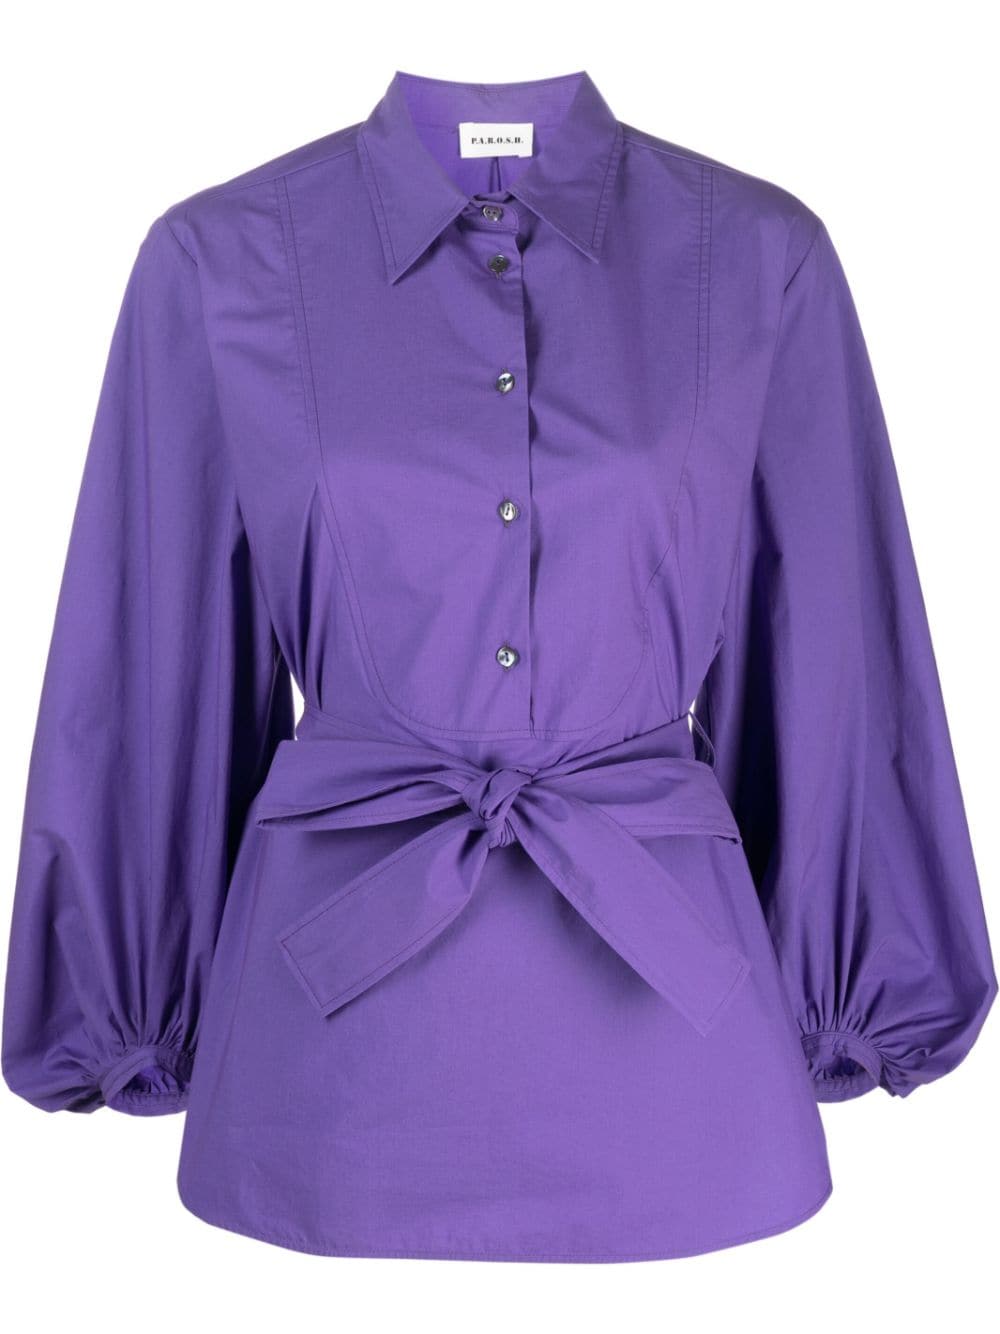 P.A.R.O.S.H. belted wide-sleeved blouse - Purple von P.A.R.O.S.H.